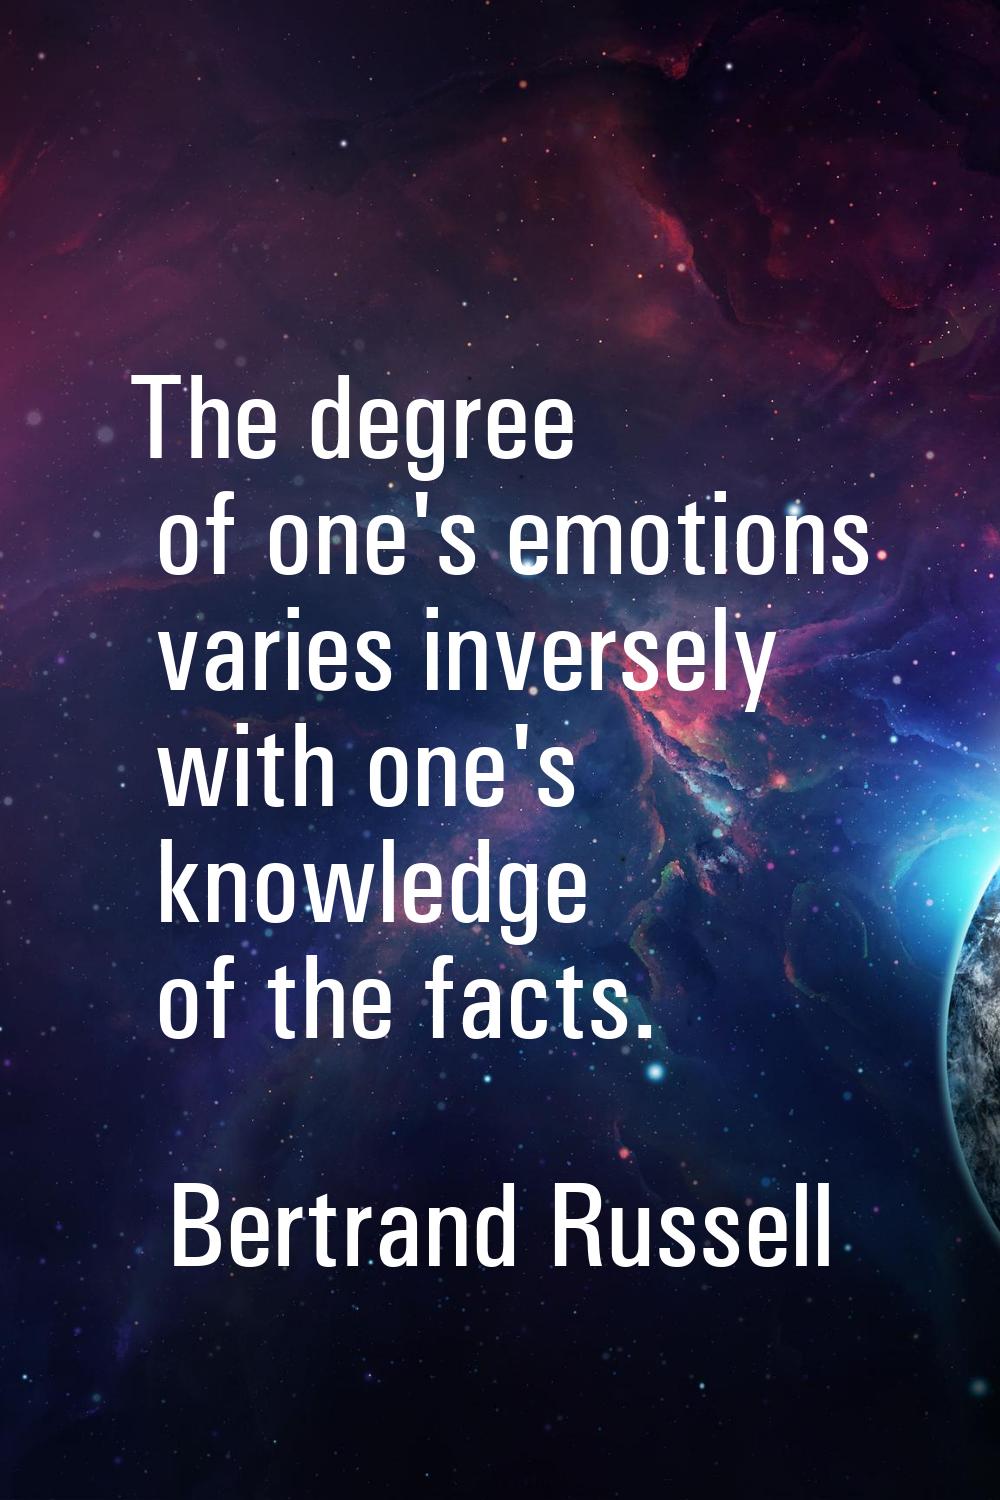 The degree of one's emotions varies inversely with one's knowledge of the facts.